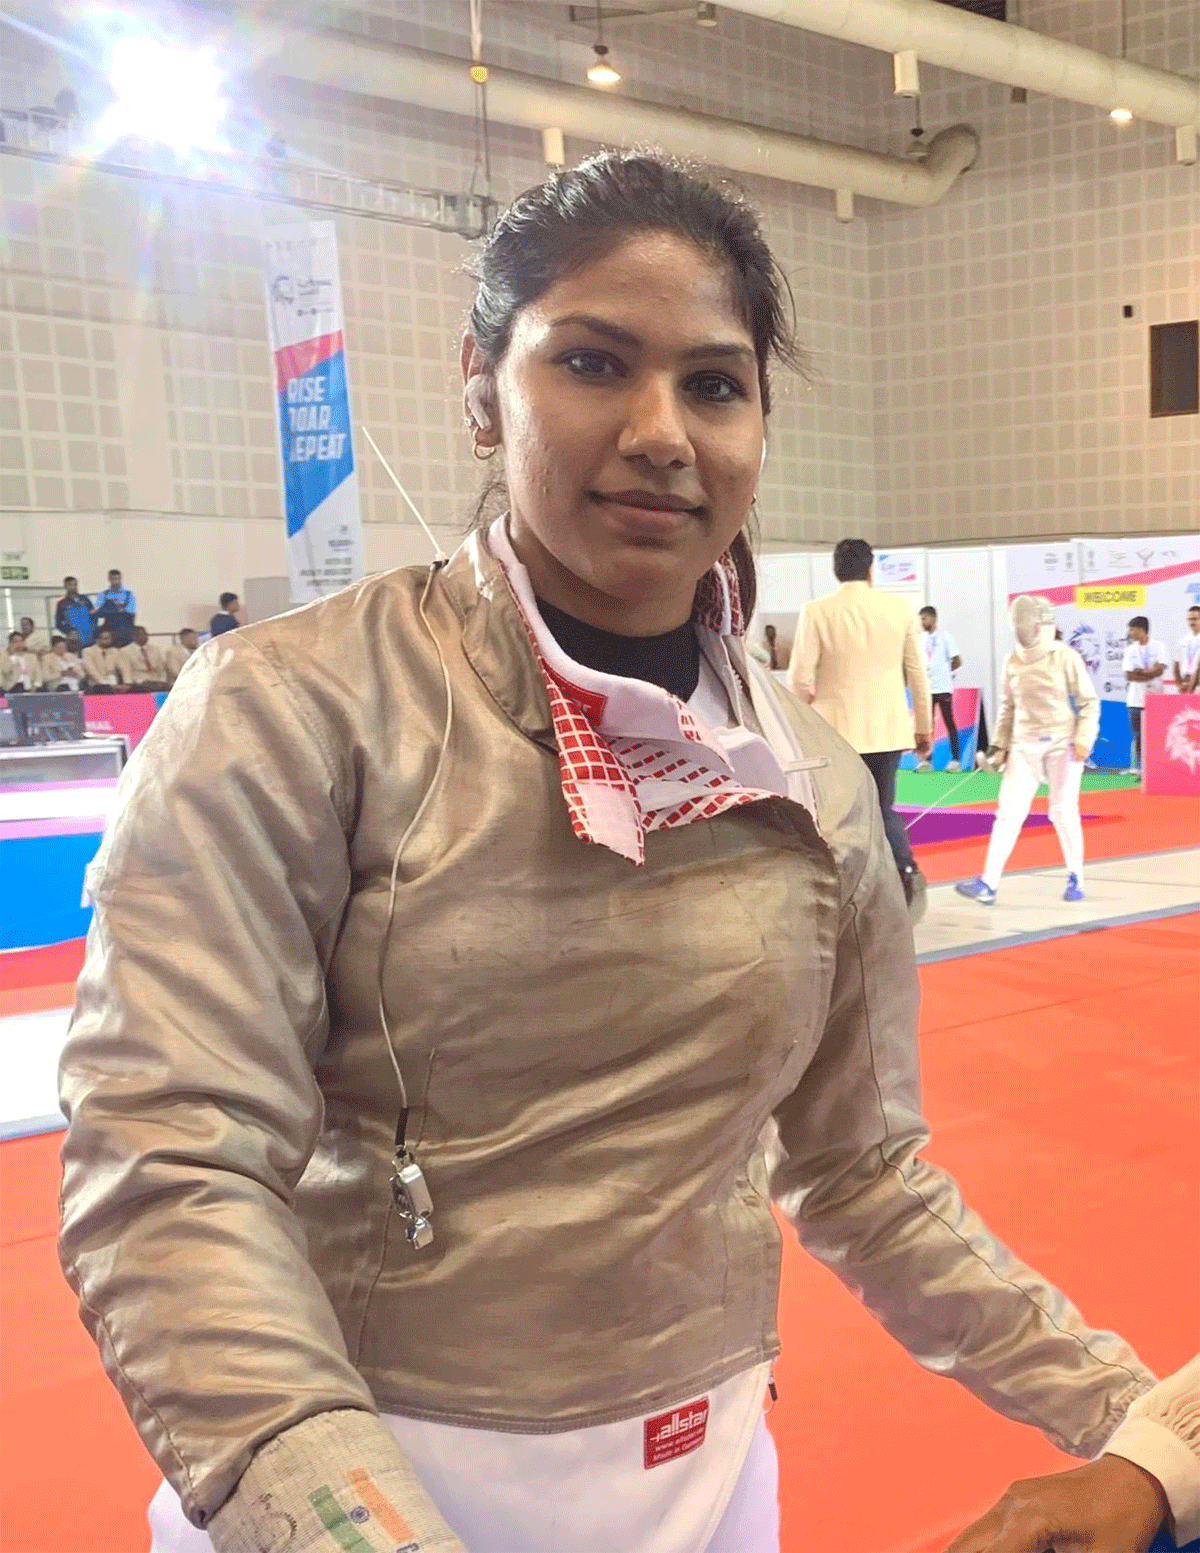 Fencer Bhavani Devi won gold in the Sabre event at the National Games on Friday